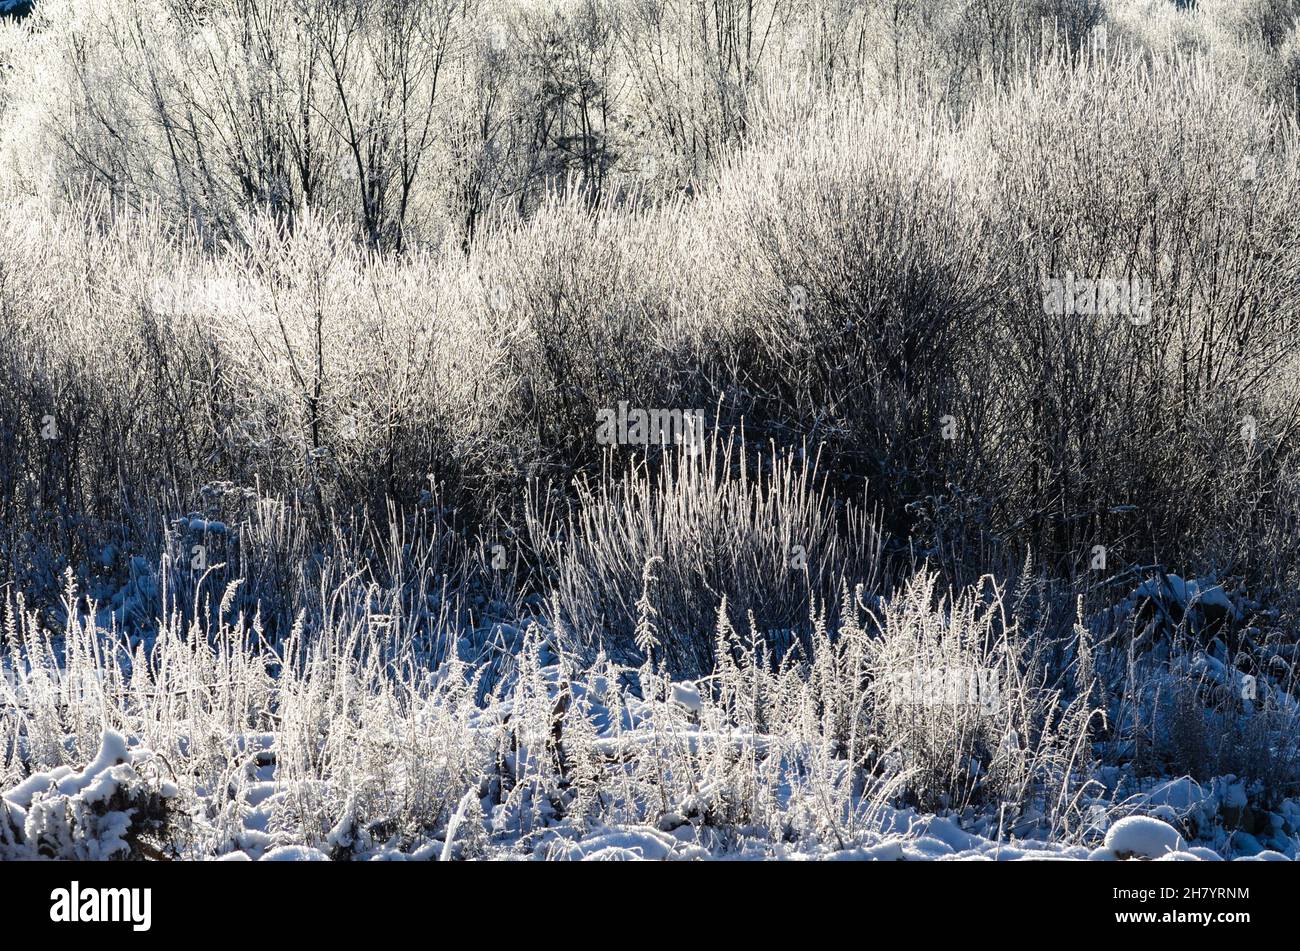 frosted trees, bushes, plants, weeds create an unusual sculpture, frosty sunny weather Stock Photo